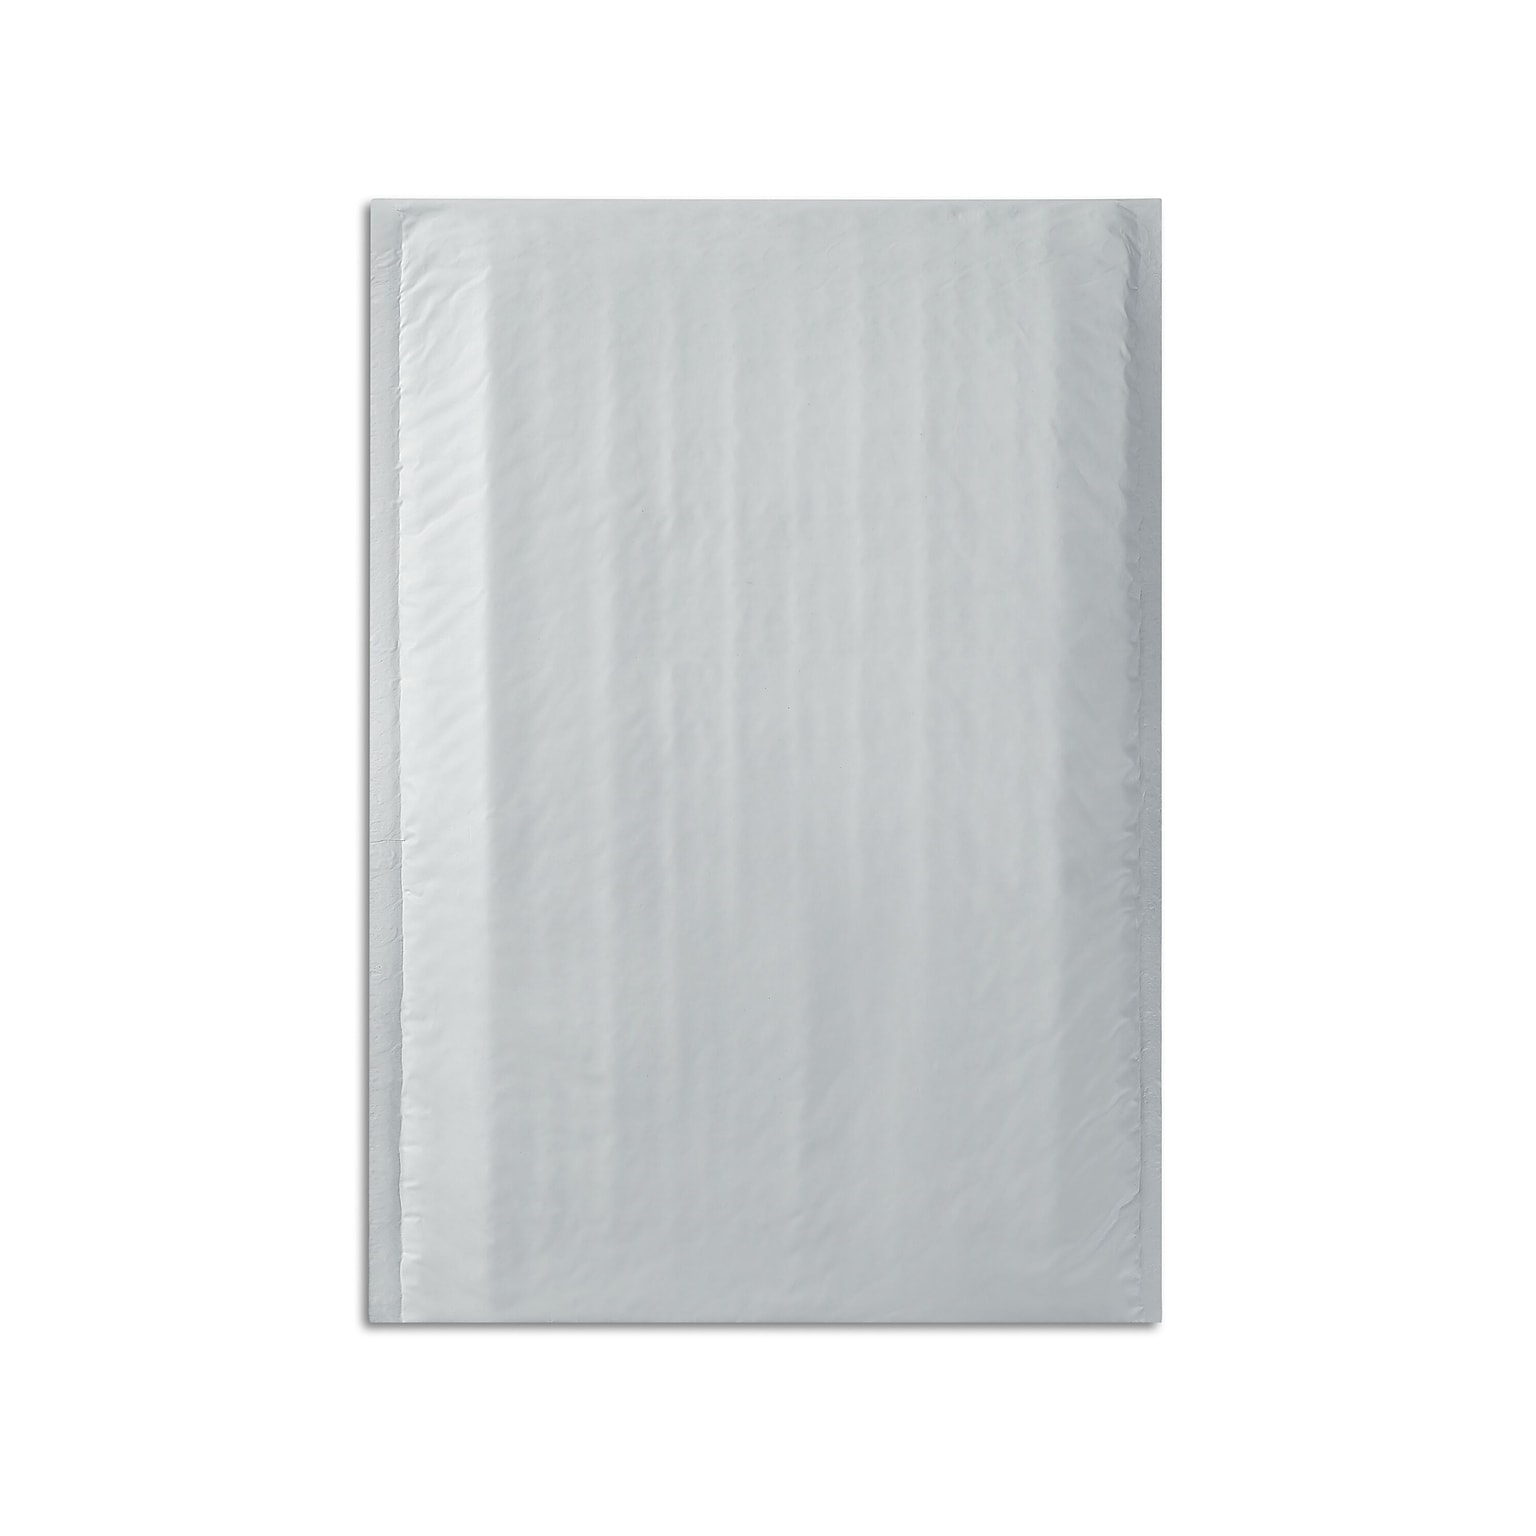 Quill Brand® #0 Peel & Seal Bubble Mailer, 6 x 9, White, 8/Pack (51625-CC)